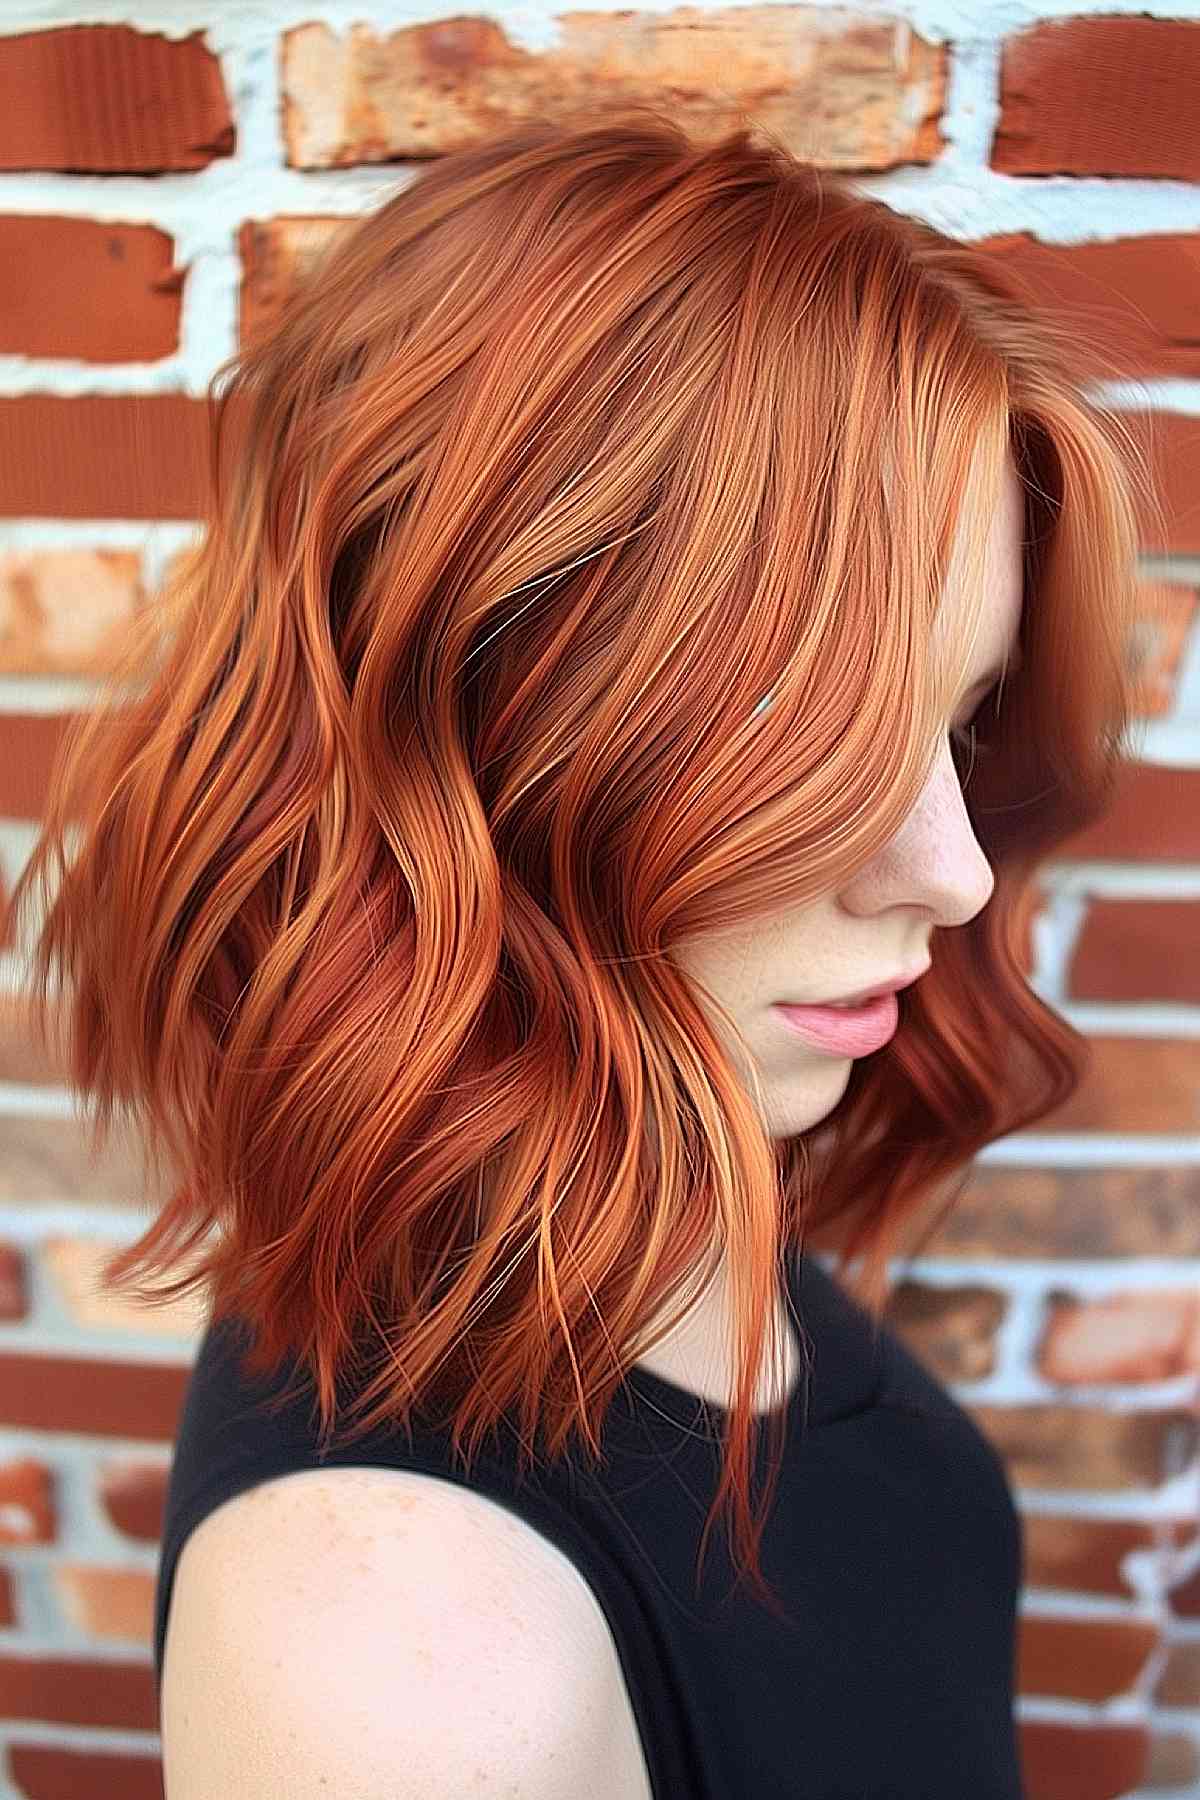 Medium-length ginger beer copper hair with textured waves